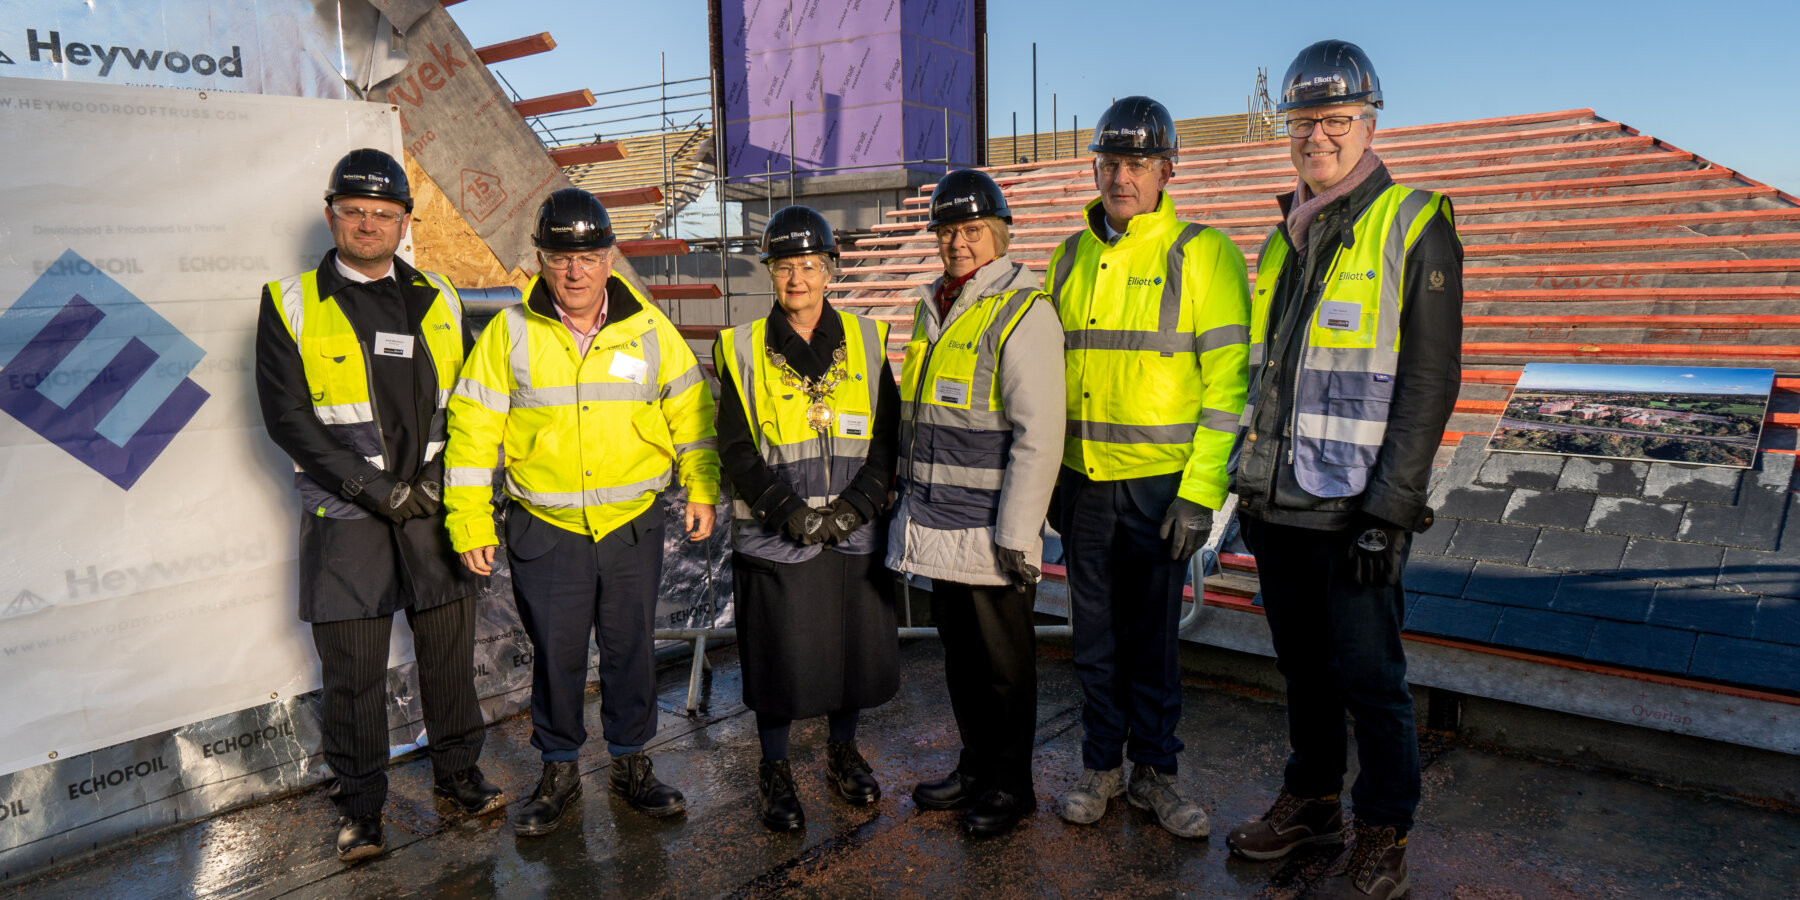 The Wyldewoods, Chester Elliott Group Topping Out